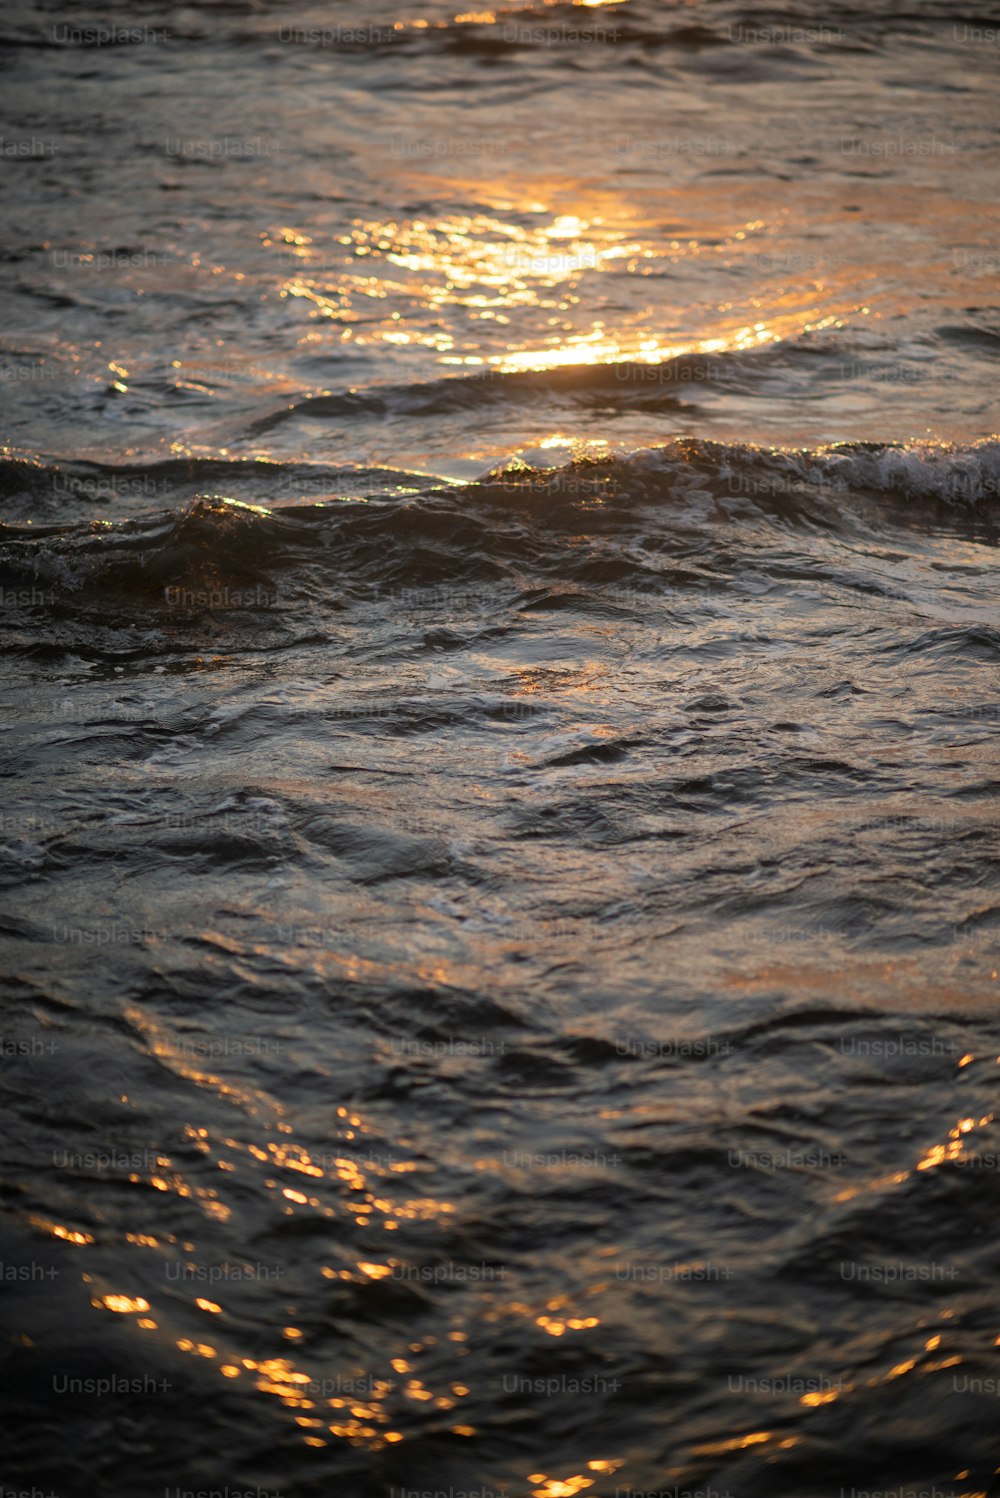 a body of water with waves and a sunset